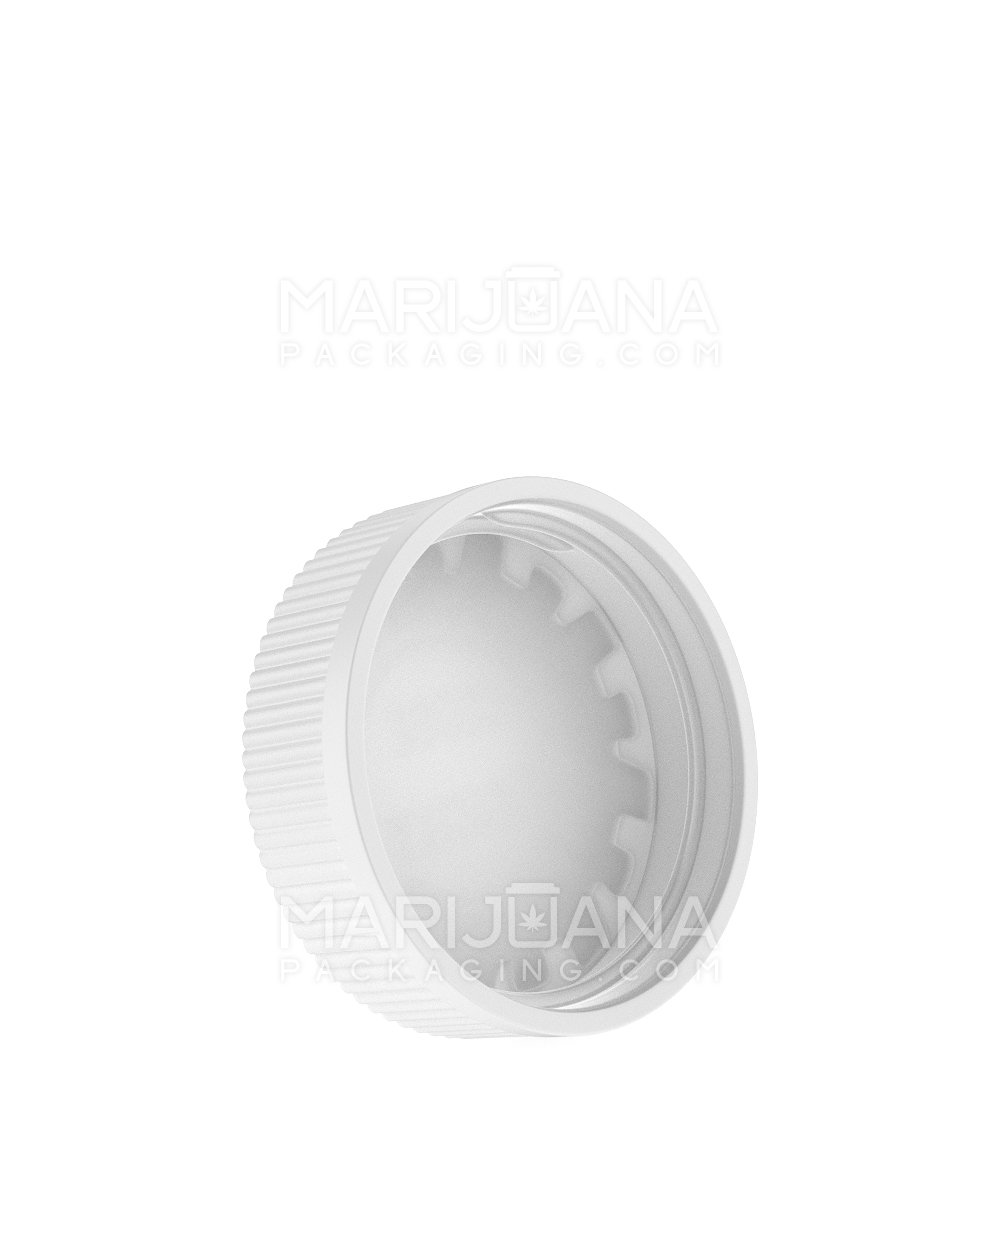 Child Resistant | Ribbed Push Down & Turn Plastic Caps | 53mm - Matte White - 120 Count - 2